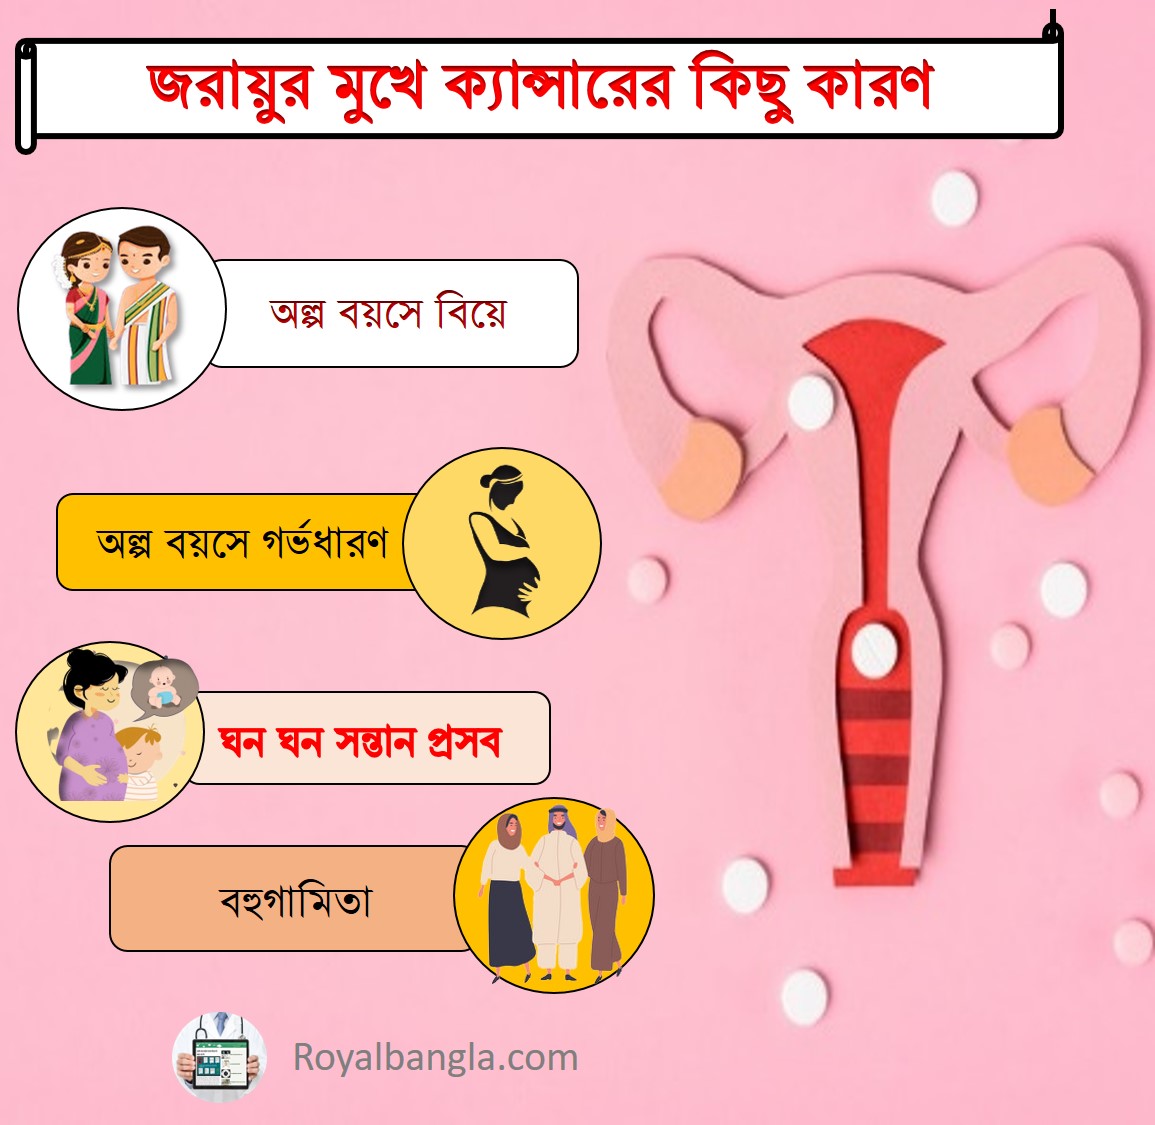 Cancer of the cervix in Bangla